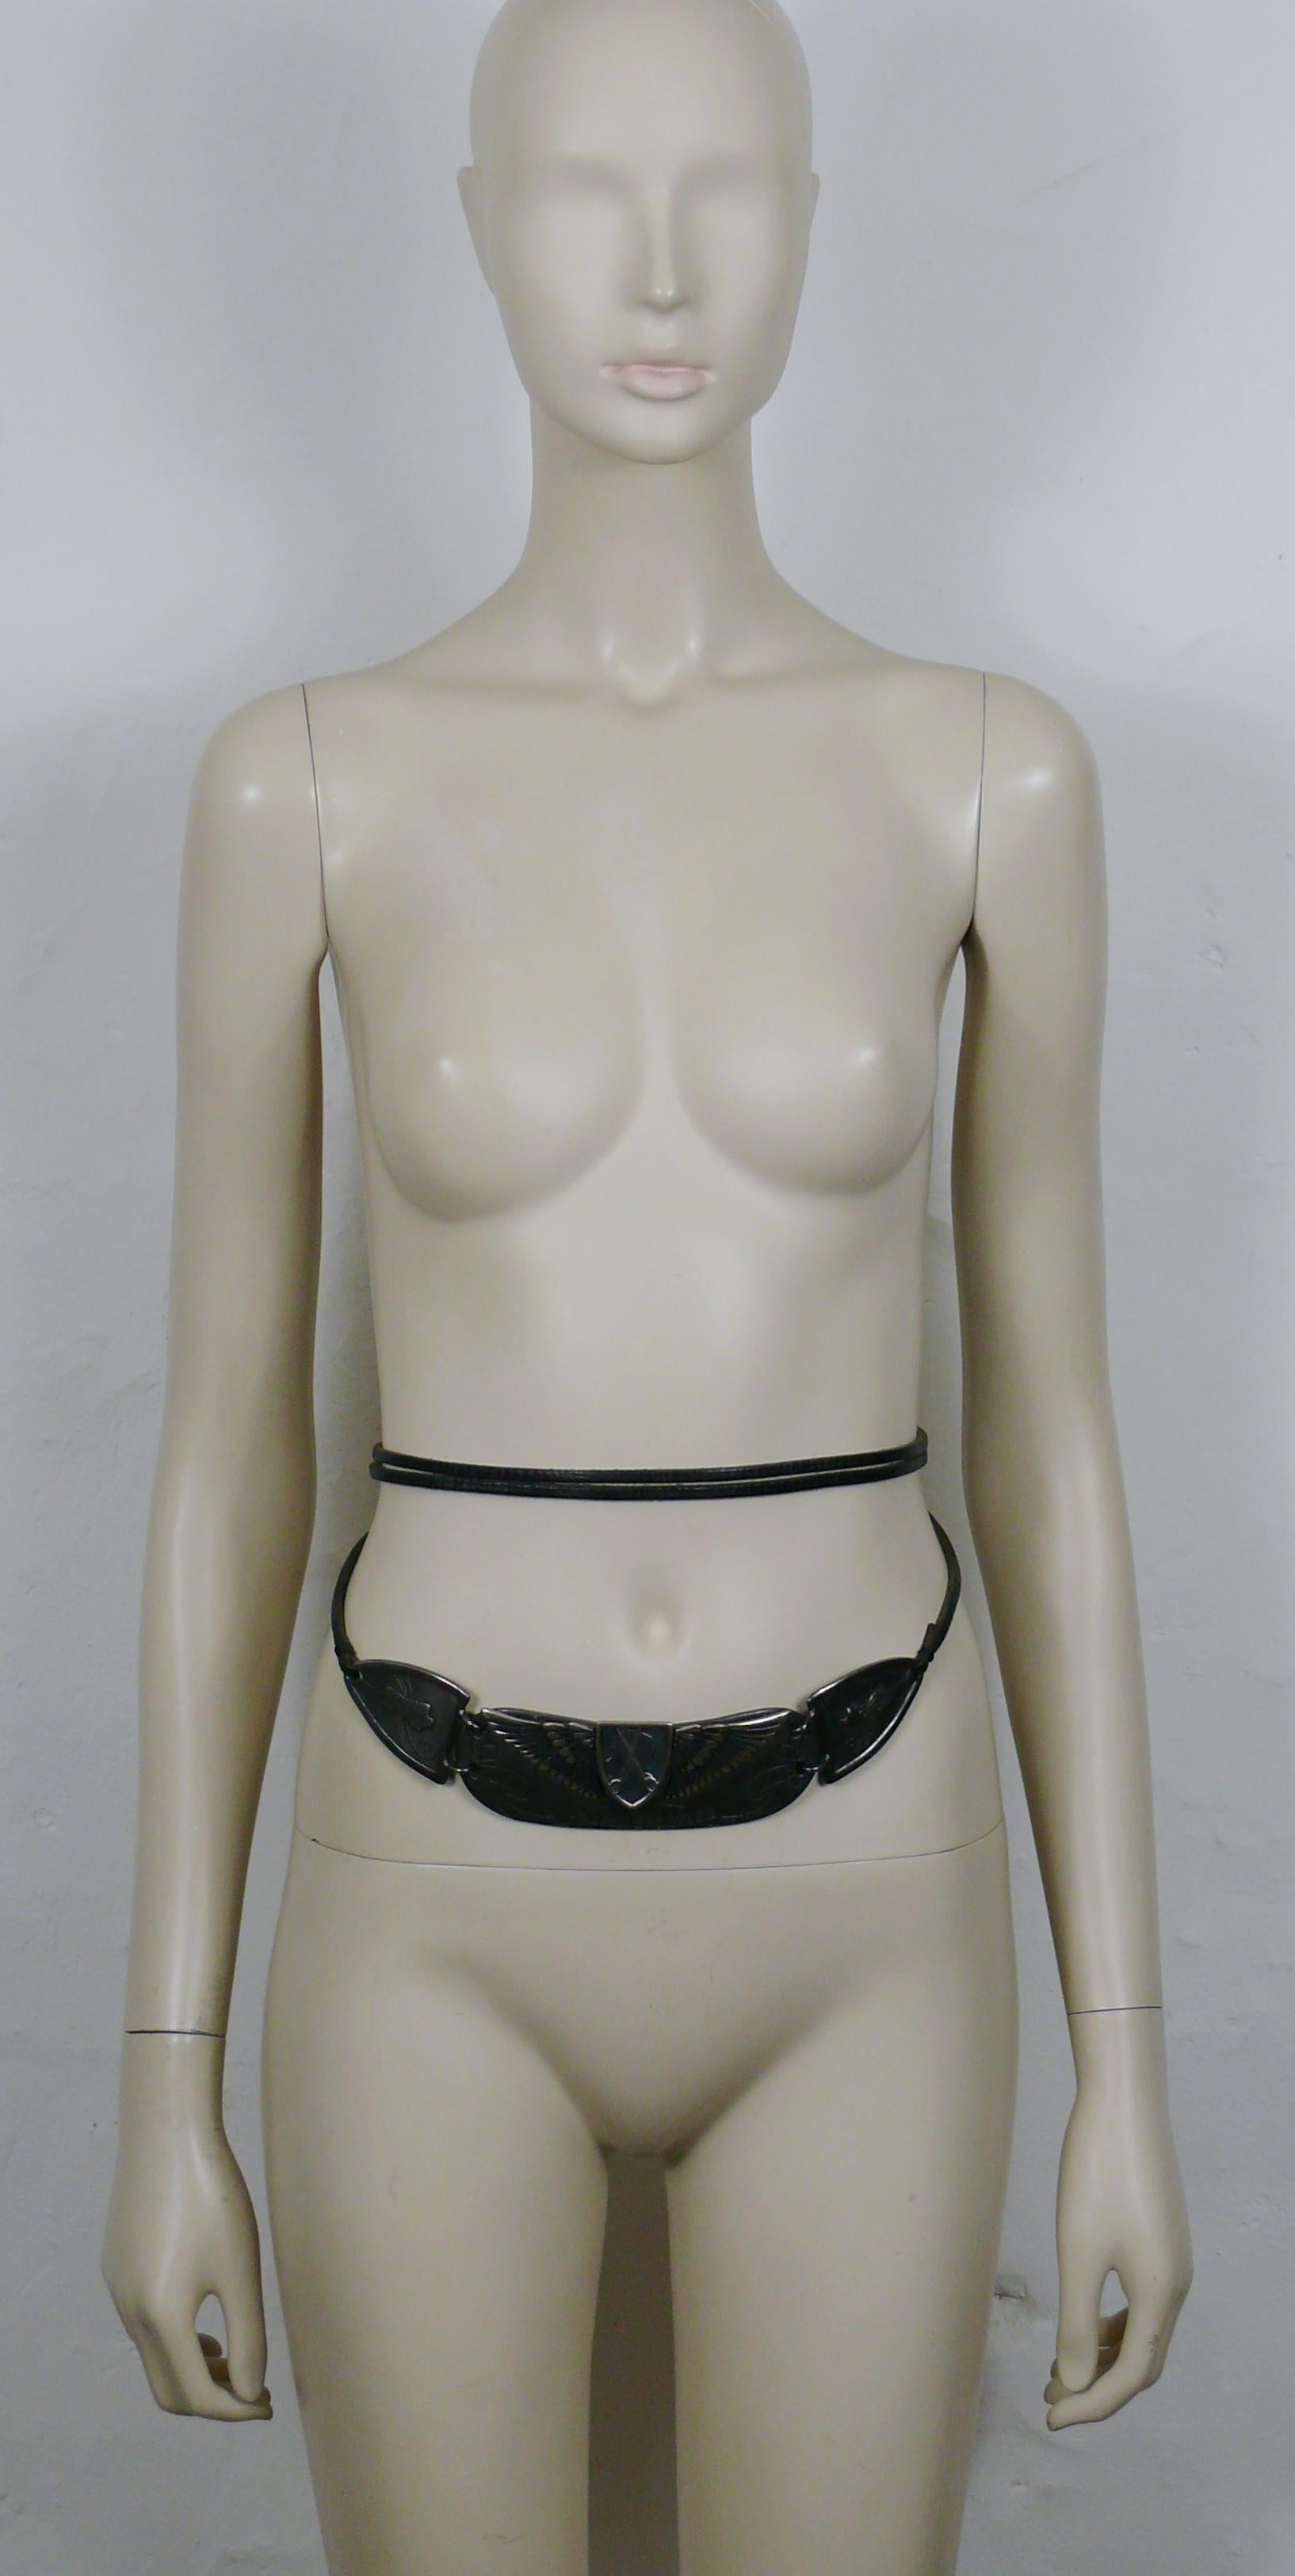 JEAN PAUL GAULTIER vintage gun tone metal 3-D buckle moto belt featuring JEAN PAUL GAULTIER profile ,sewing attributes and mannequins.

Black leather straps.
Ties around the waist.
One size fits all.

Limited edition belt edited on the occasion of